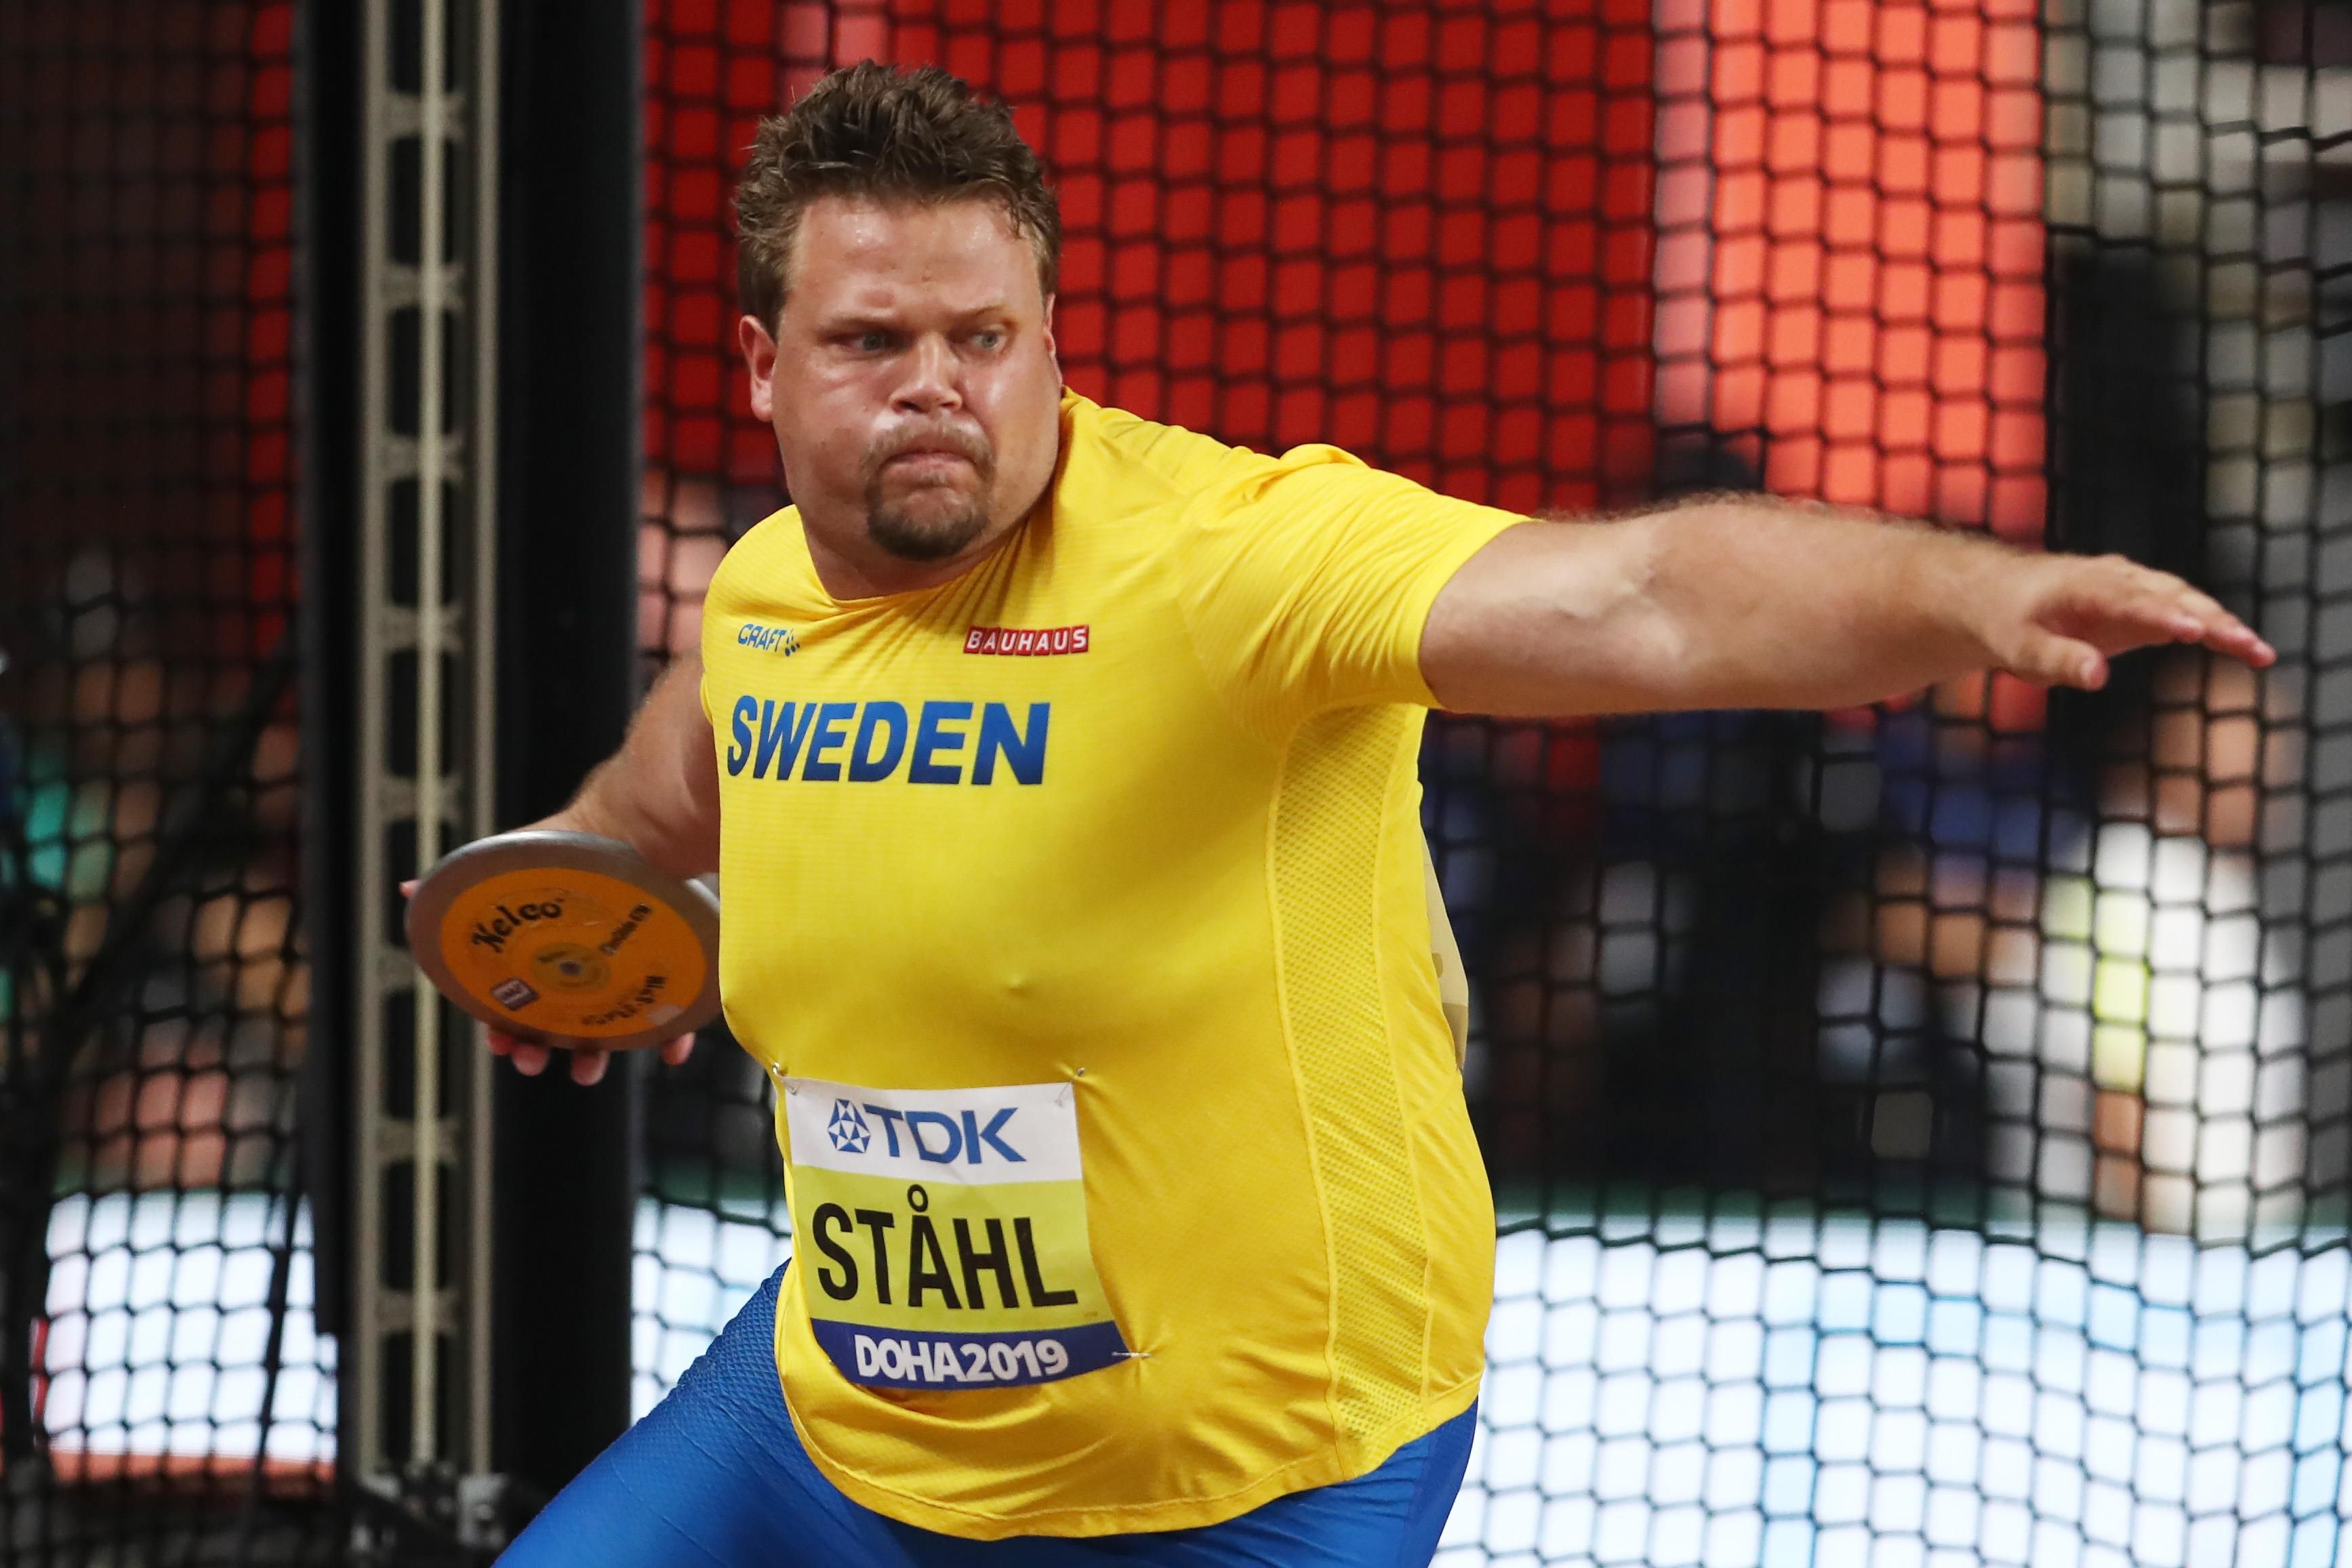 Daniel Stahl in the discus at the IAAF World Athletics Championships Doha 2019